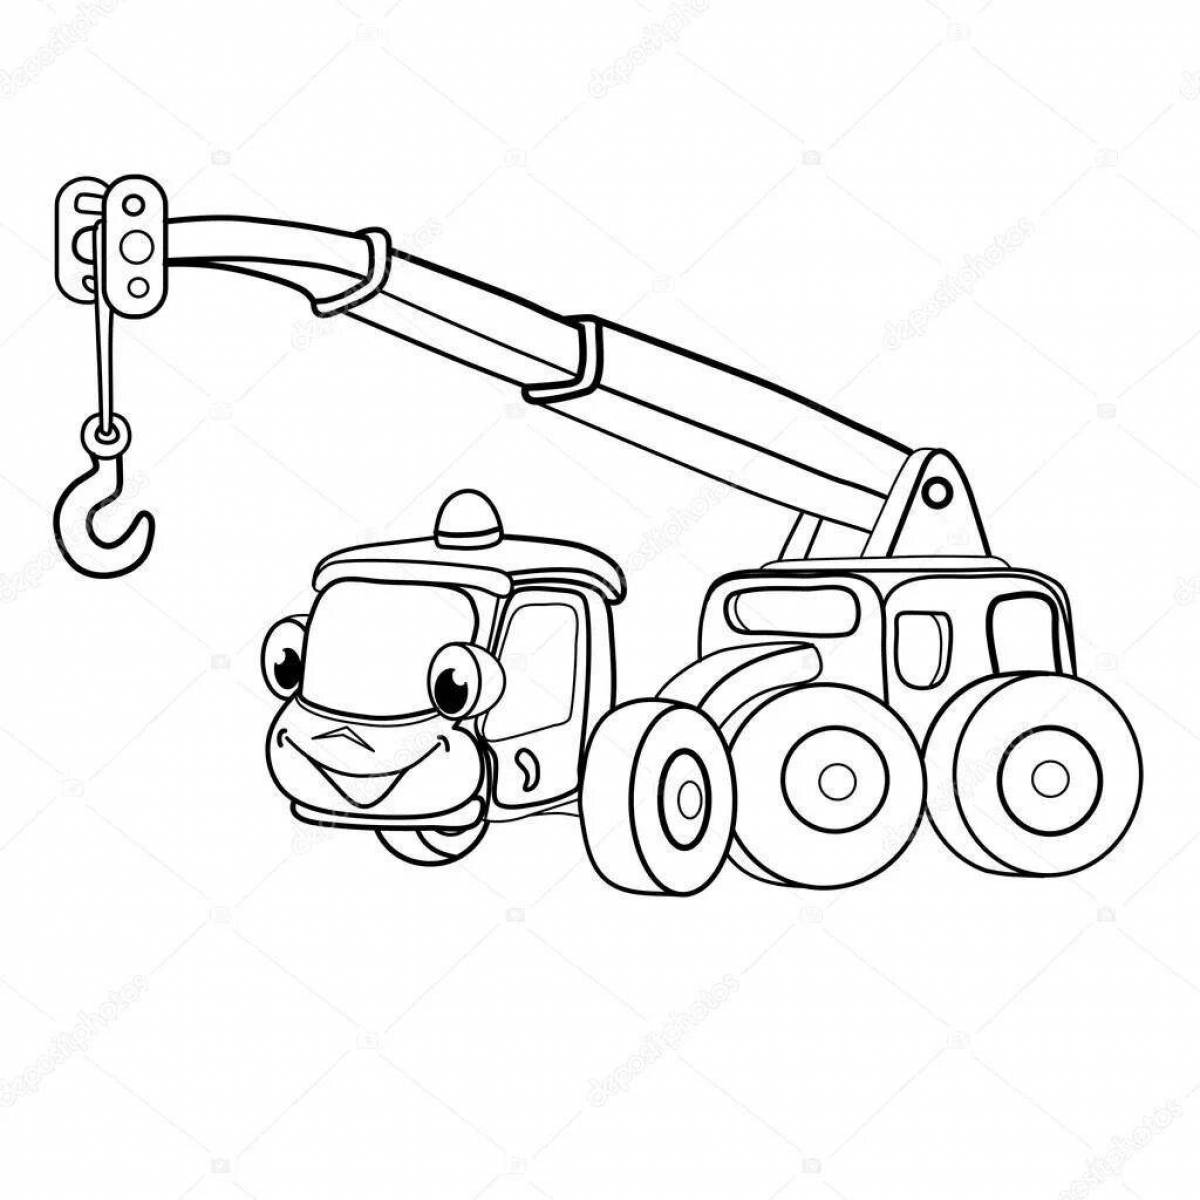 Adorable crane coloring page for 3-4 year olds